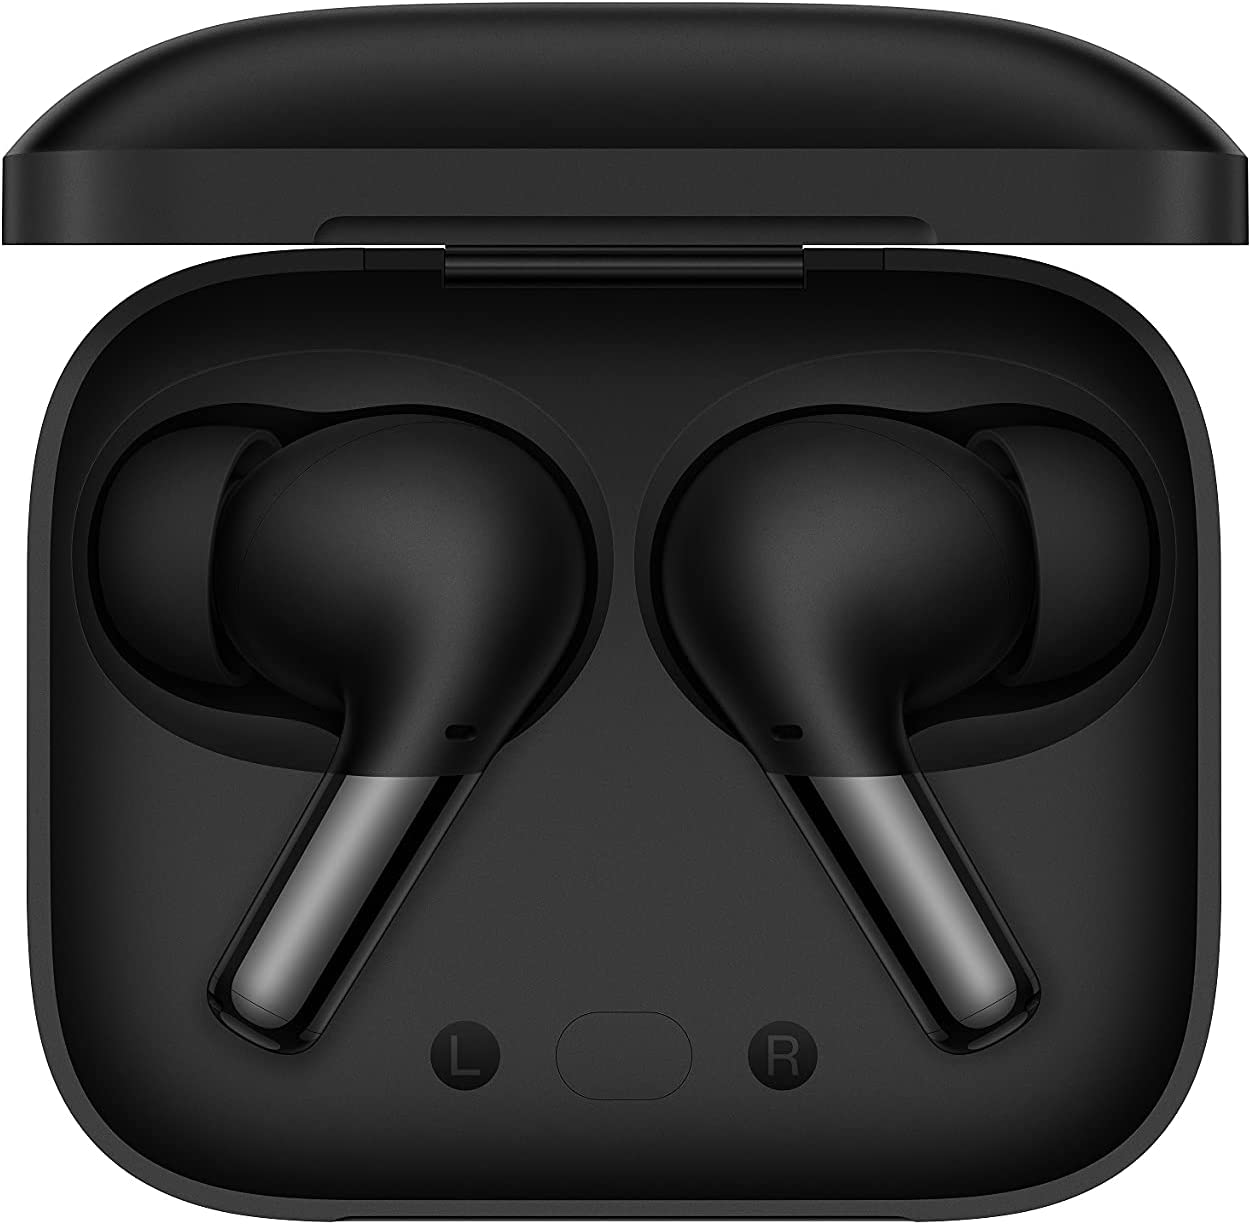 WHICH ARE THE BEST WIRELESS EARBUDS TO PURCHASE RIGHT NOW?